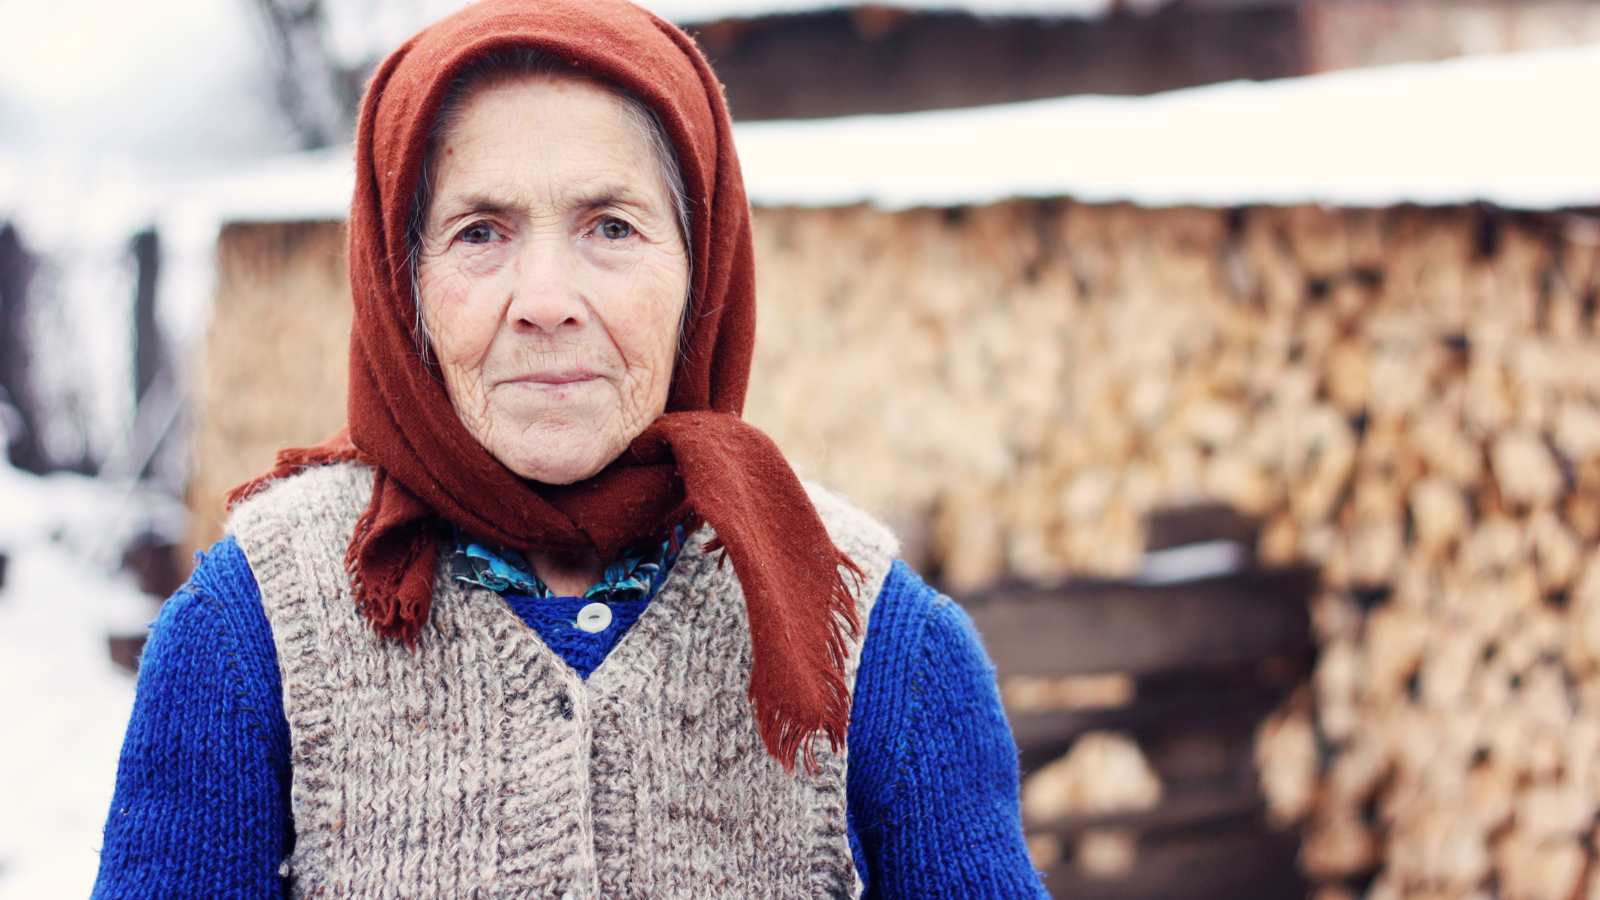 An elderly Slavic woman stands outside in the snow.